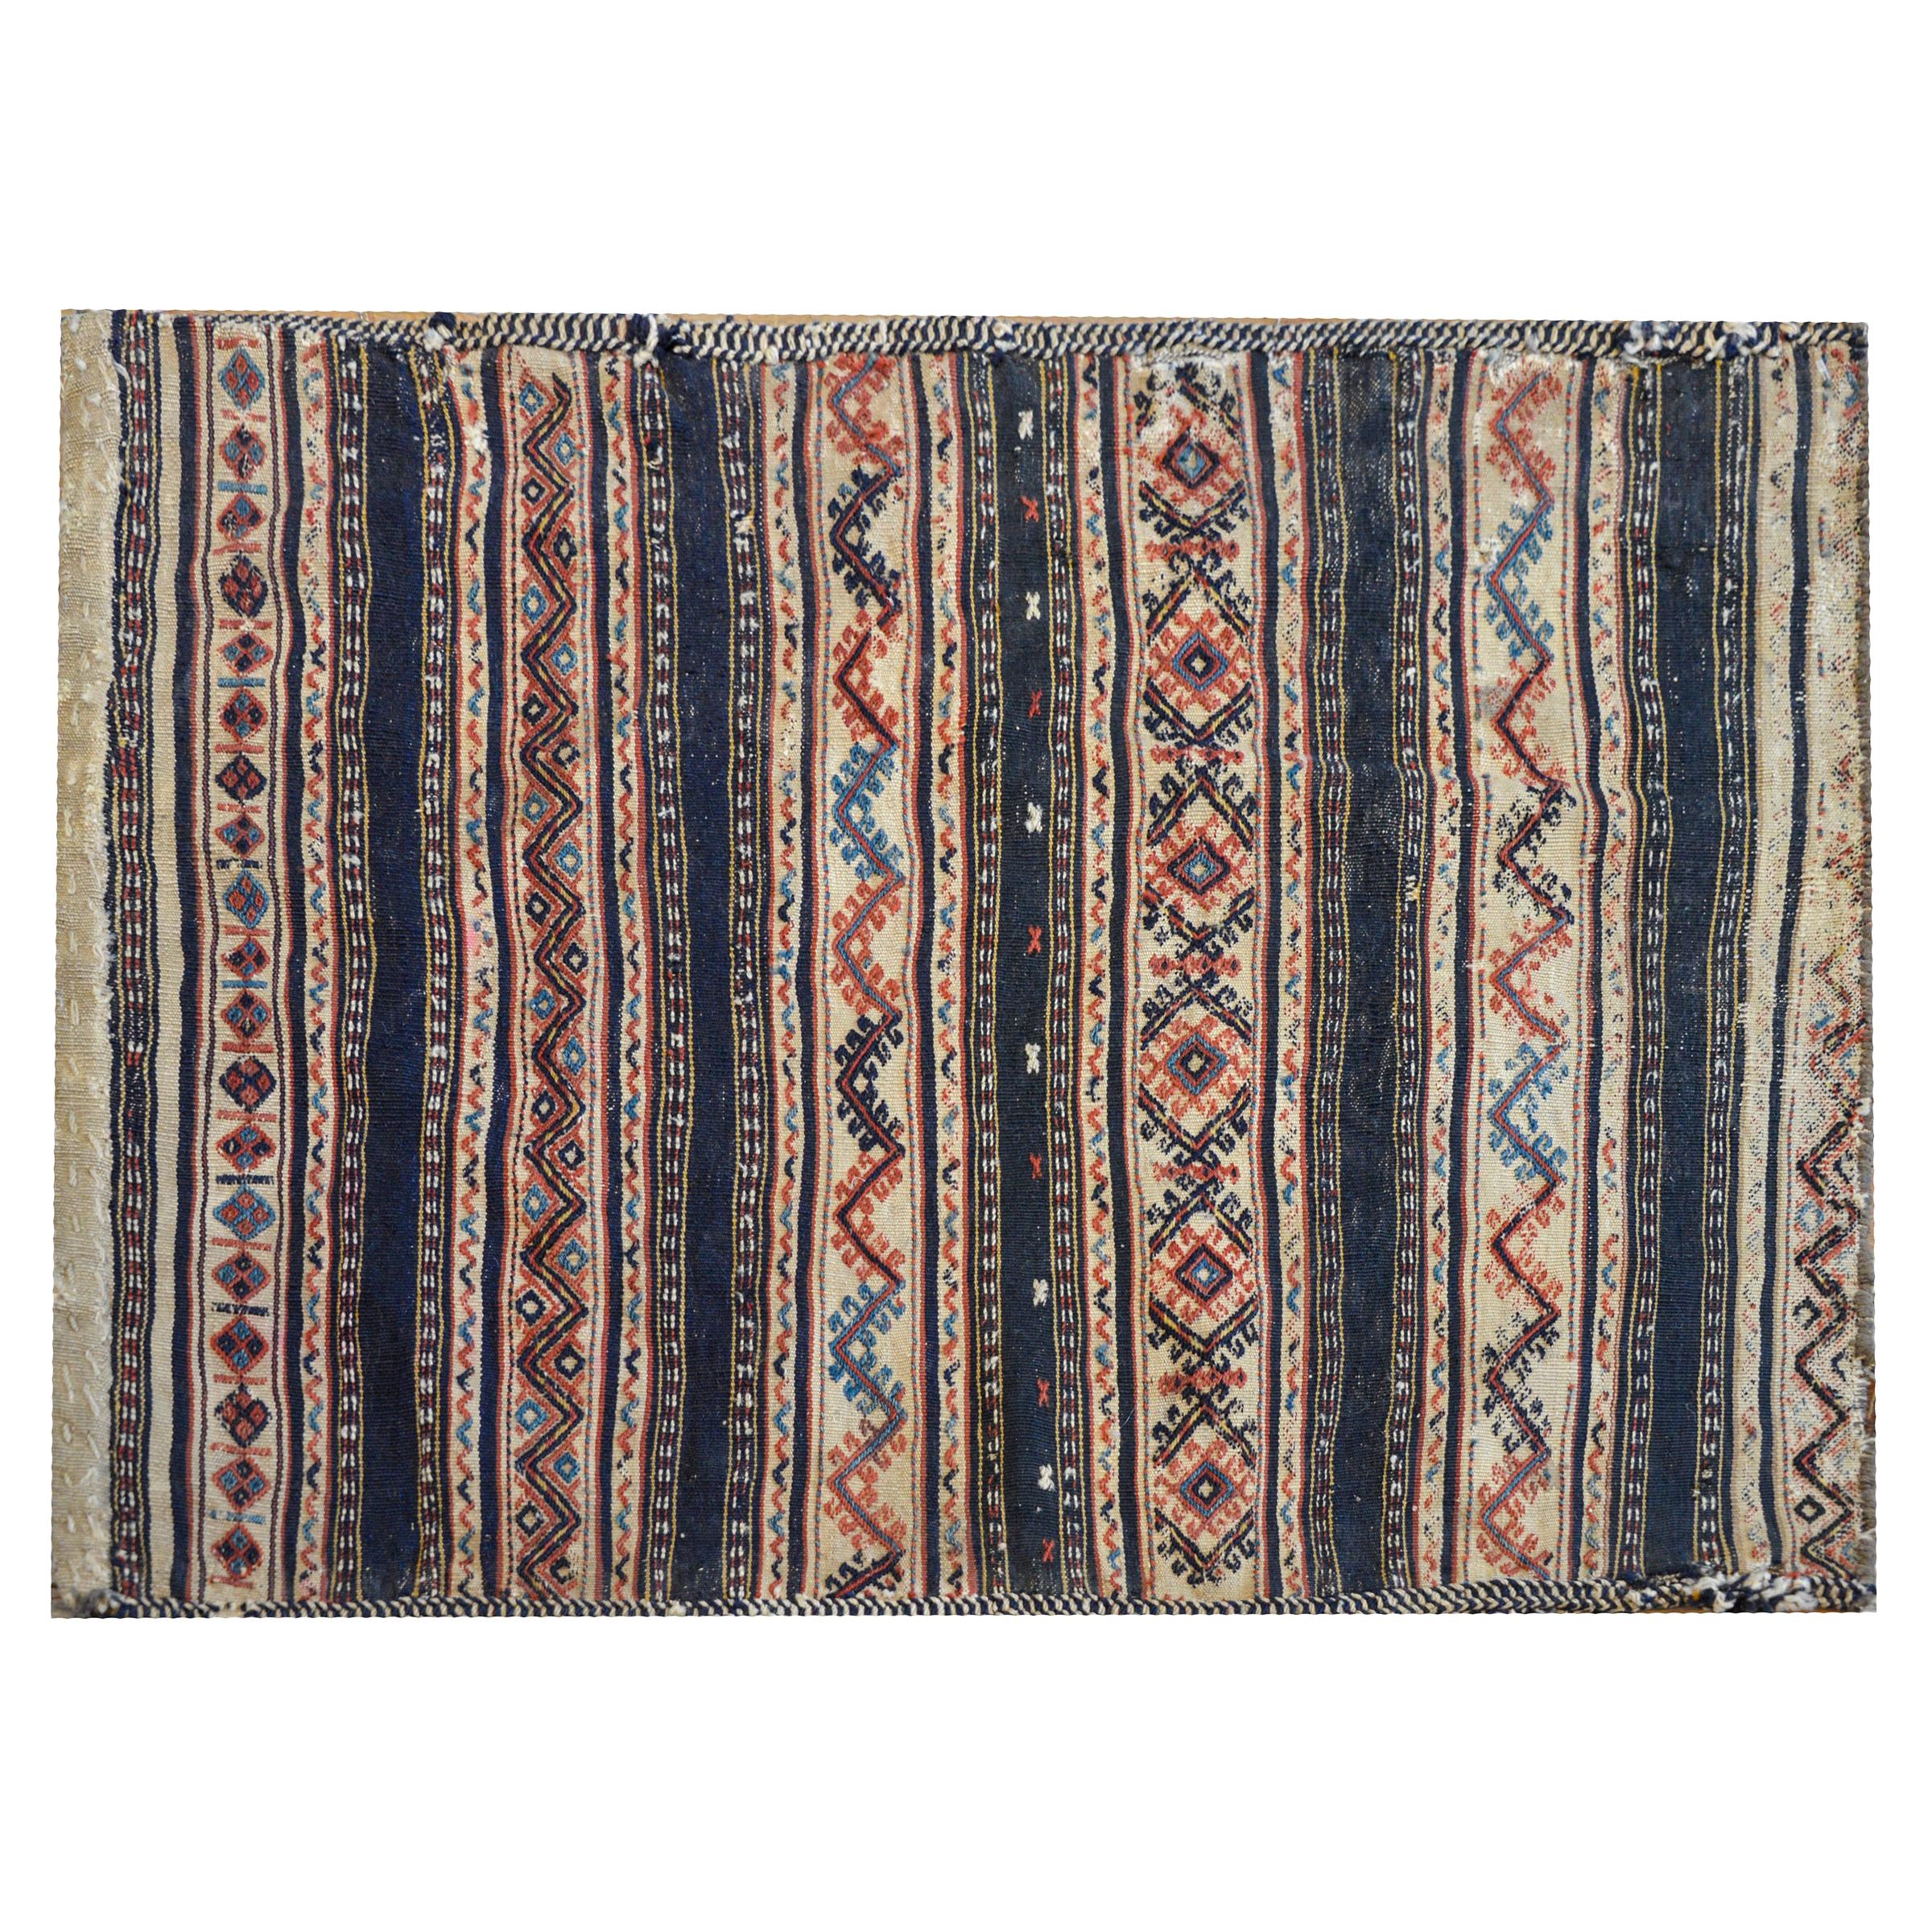 Gorgeous Early 20th Century Afshar Rug